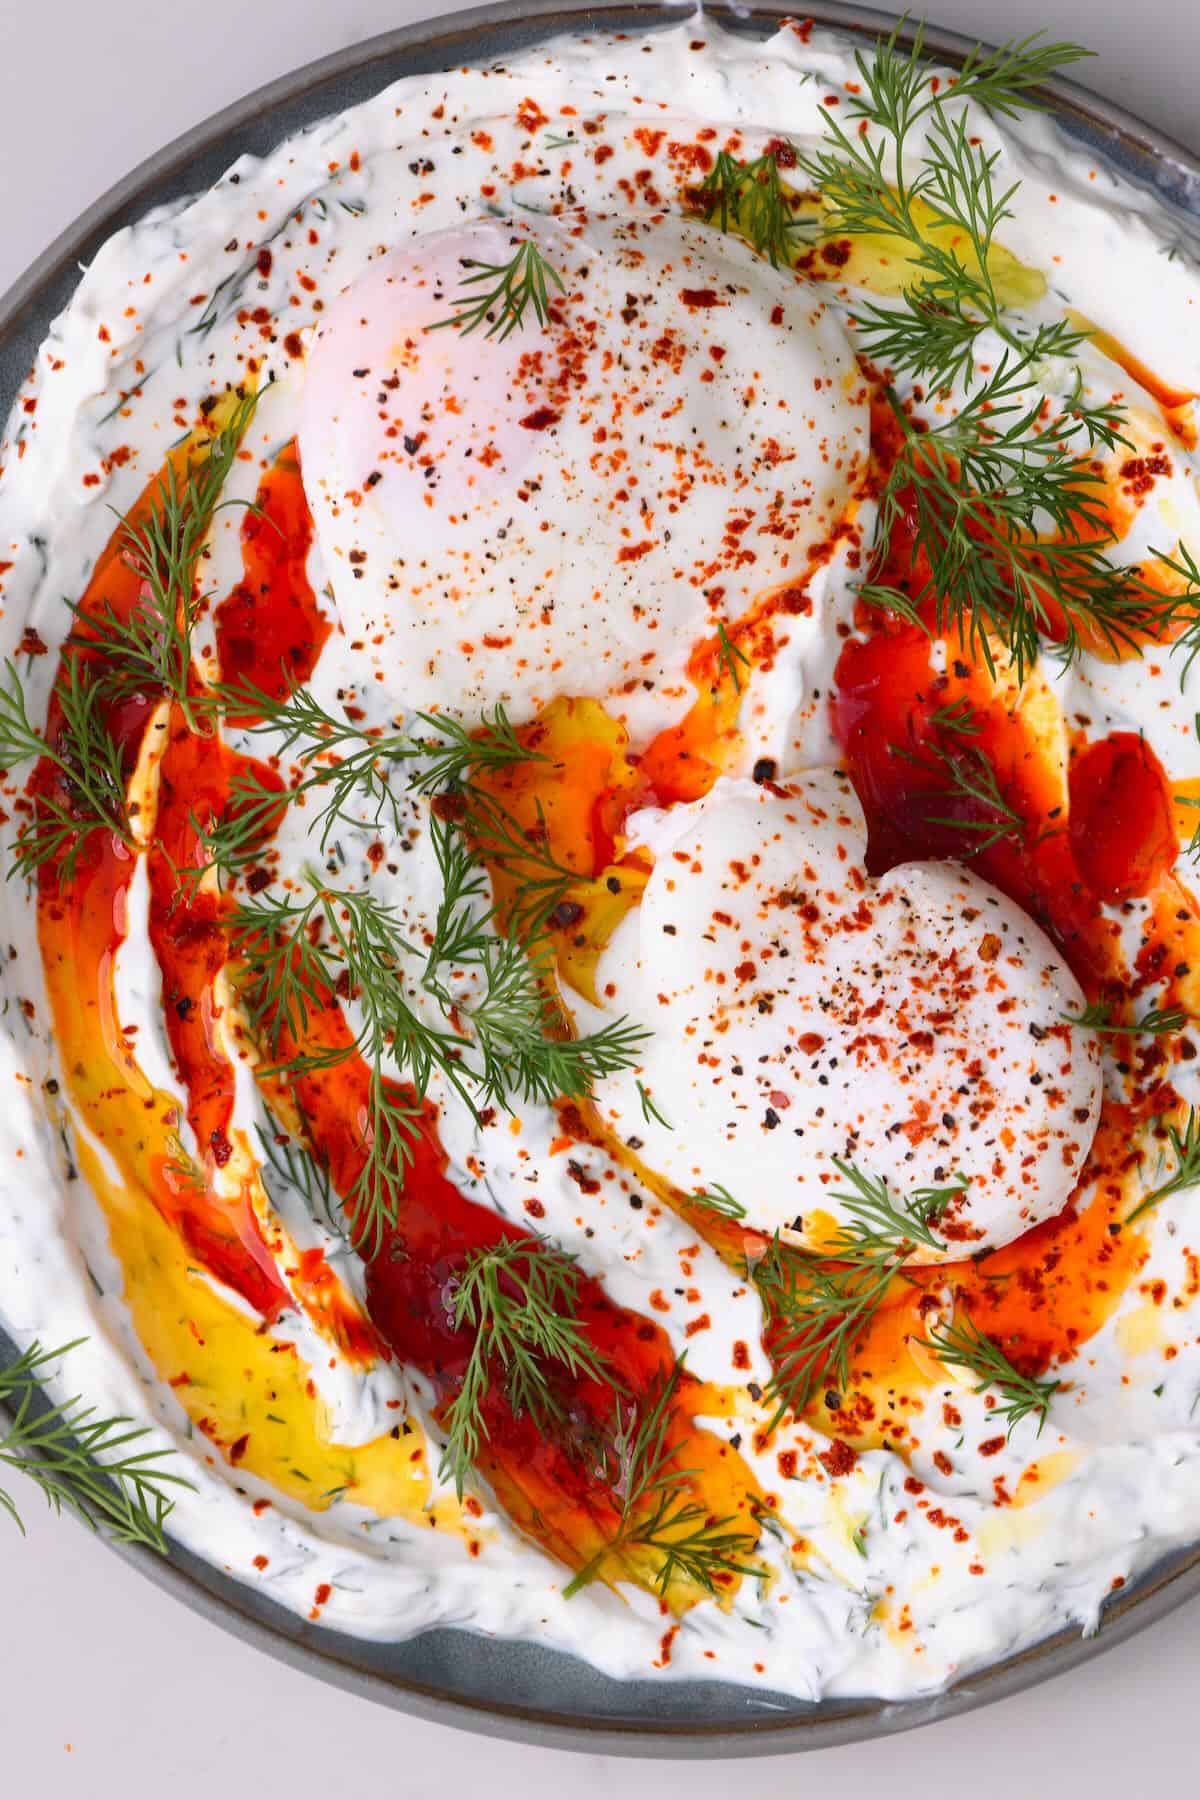 Turkish eggs served in a large plate